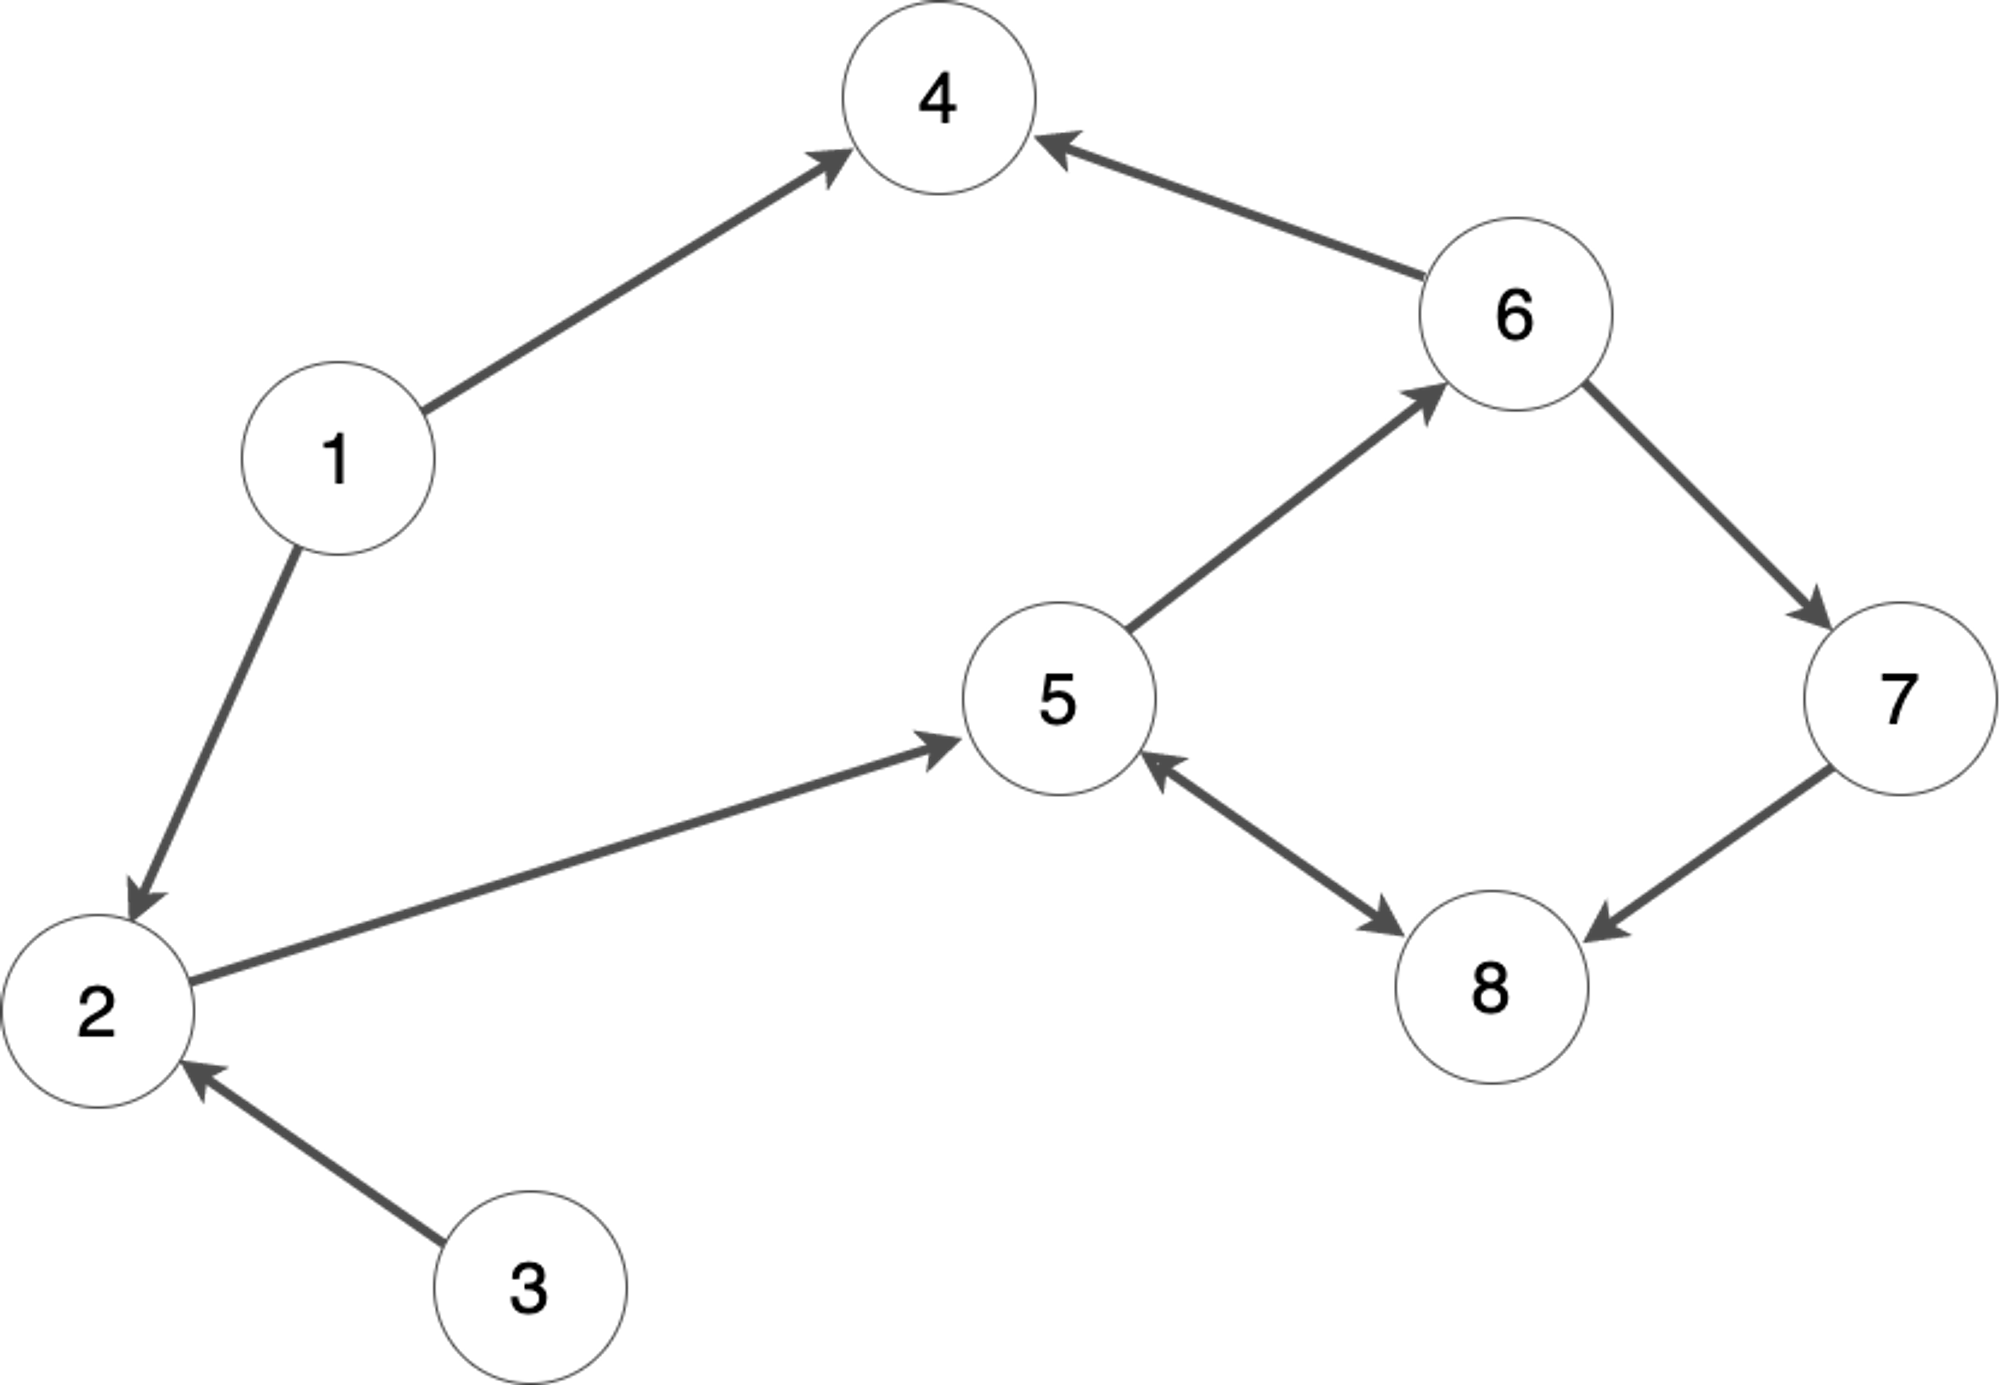 A directed graph with 8 edges and 10 edges. Notice that vertices 5 and 8 have a bidirectional connection.